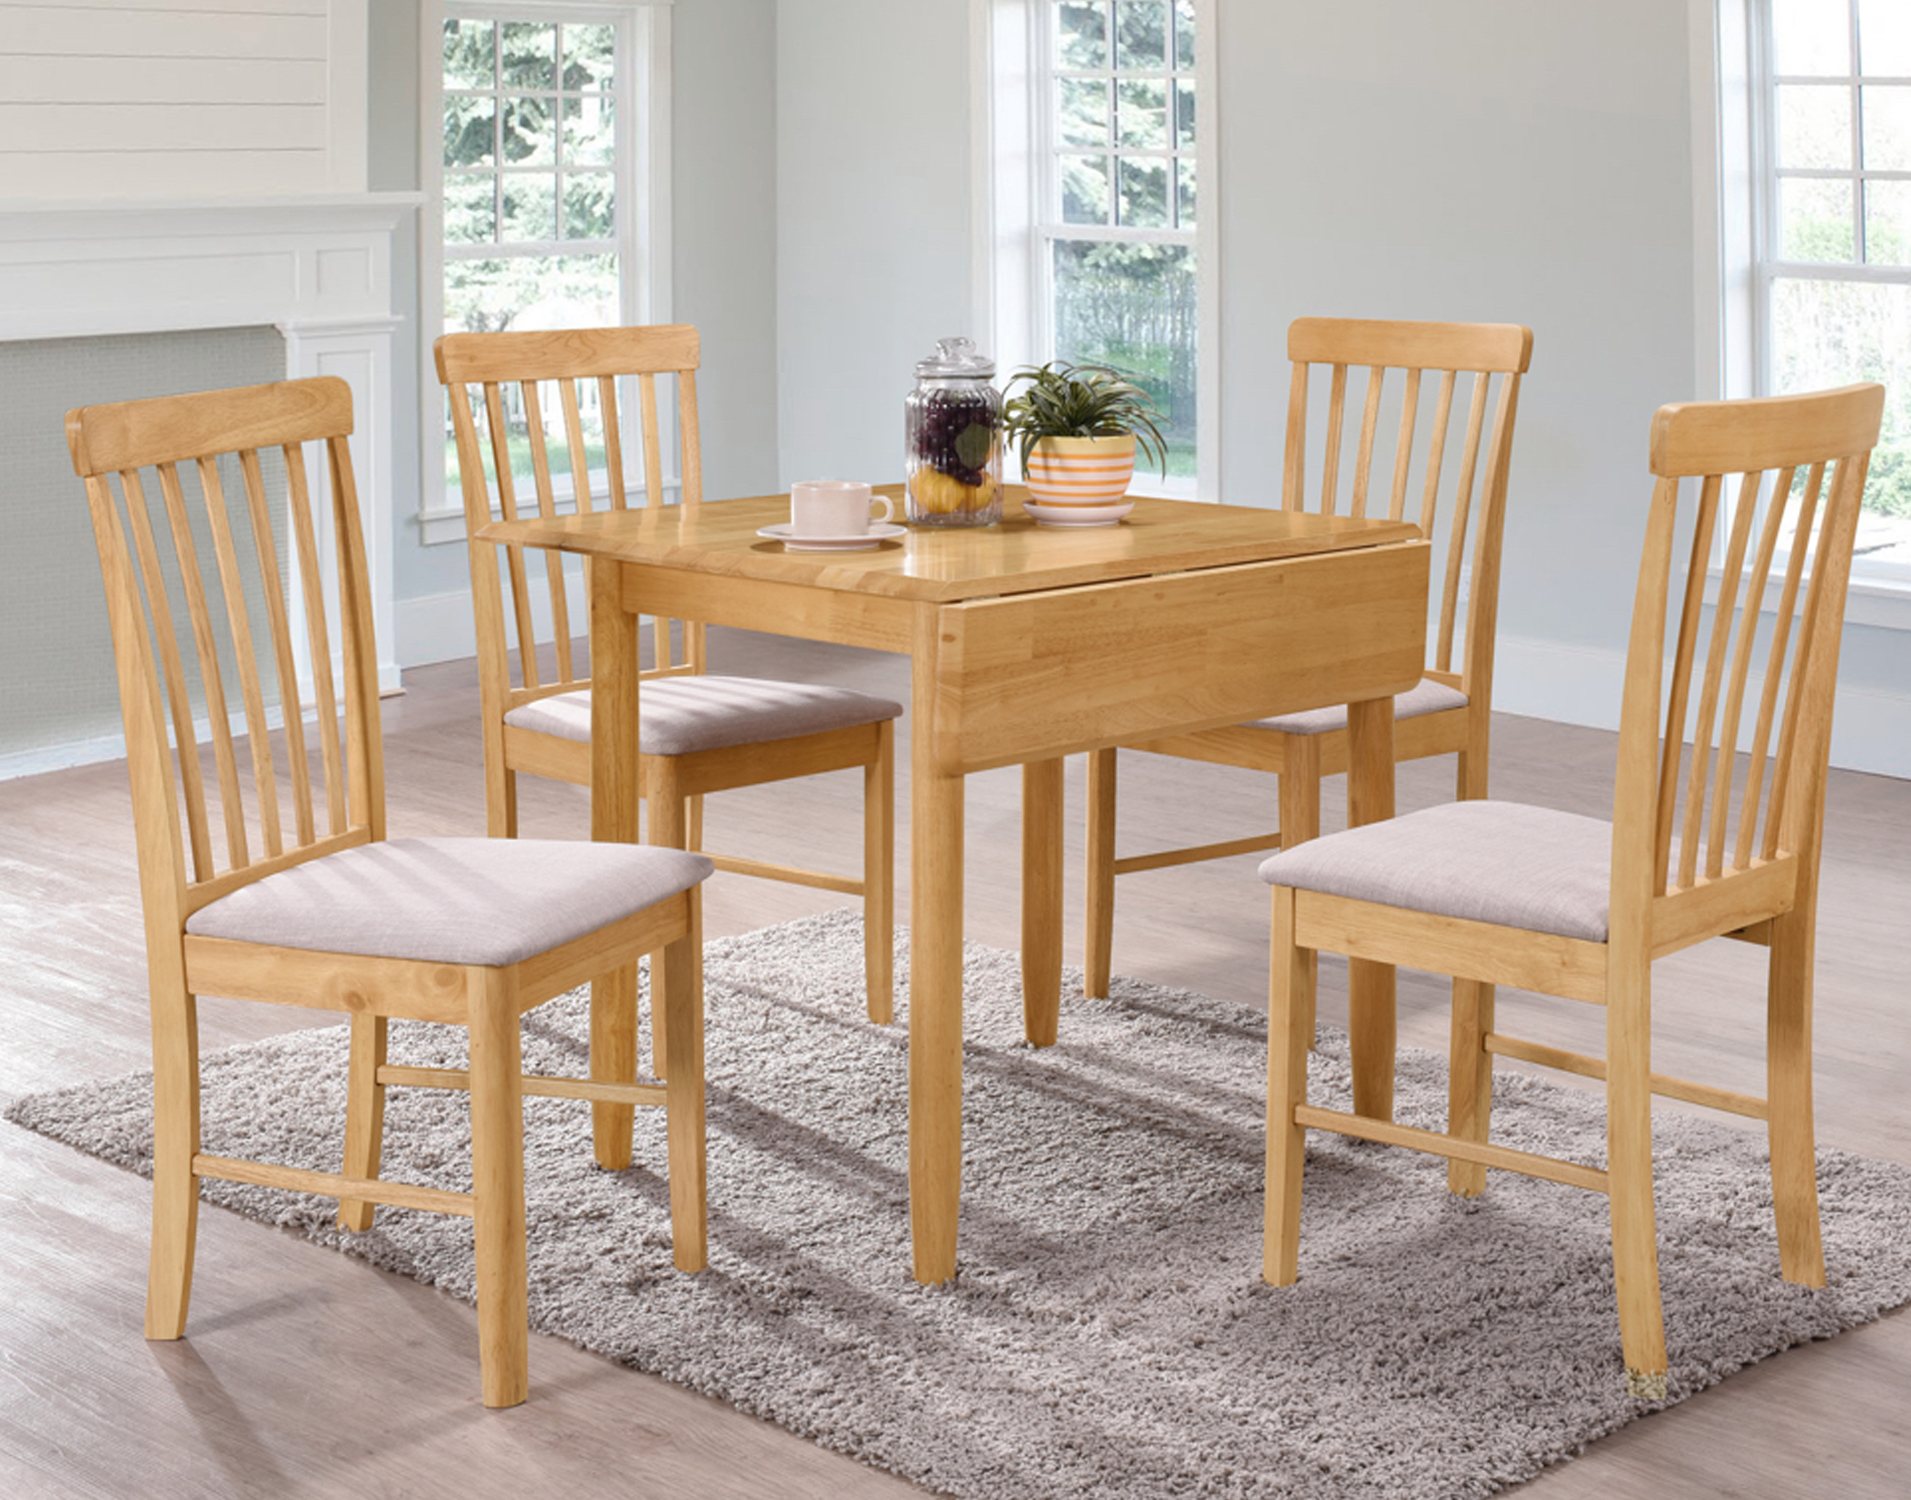 oak top kitchen table with 4 chair